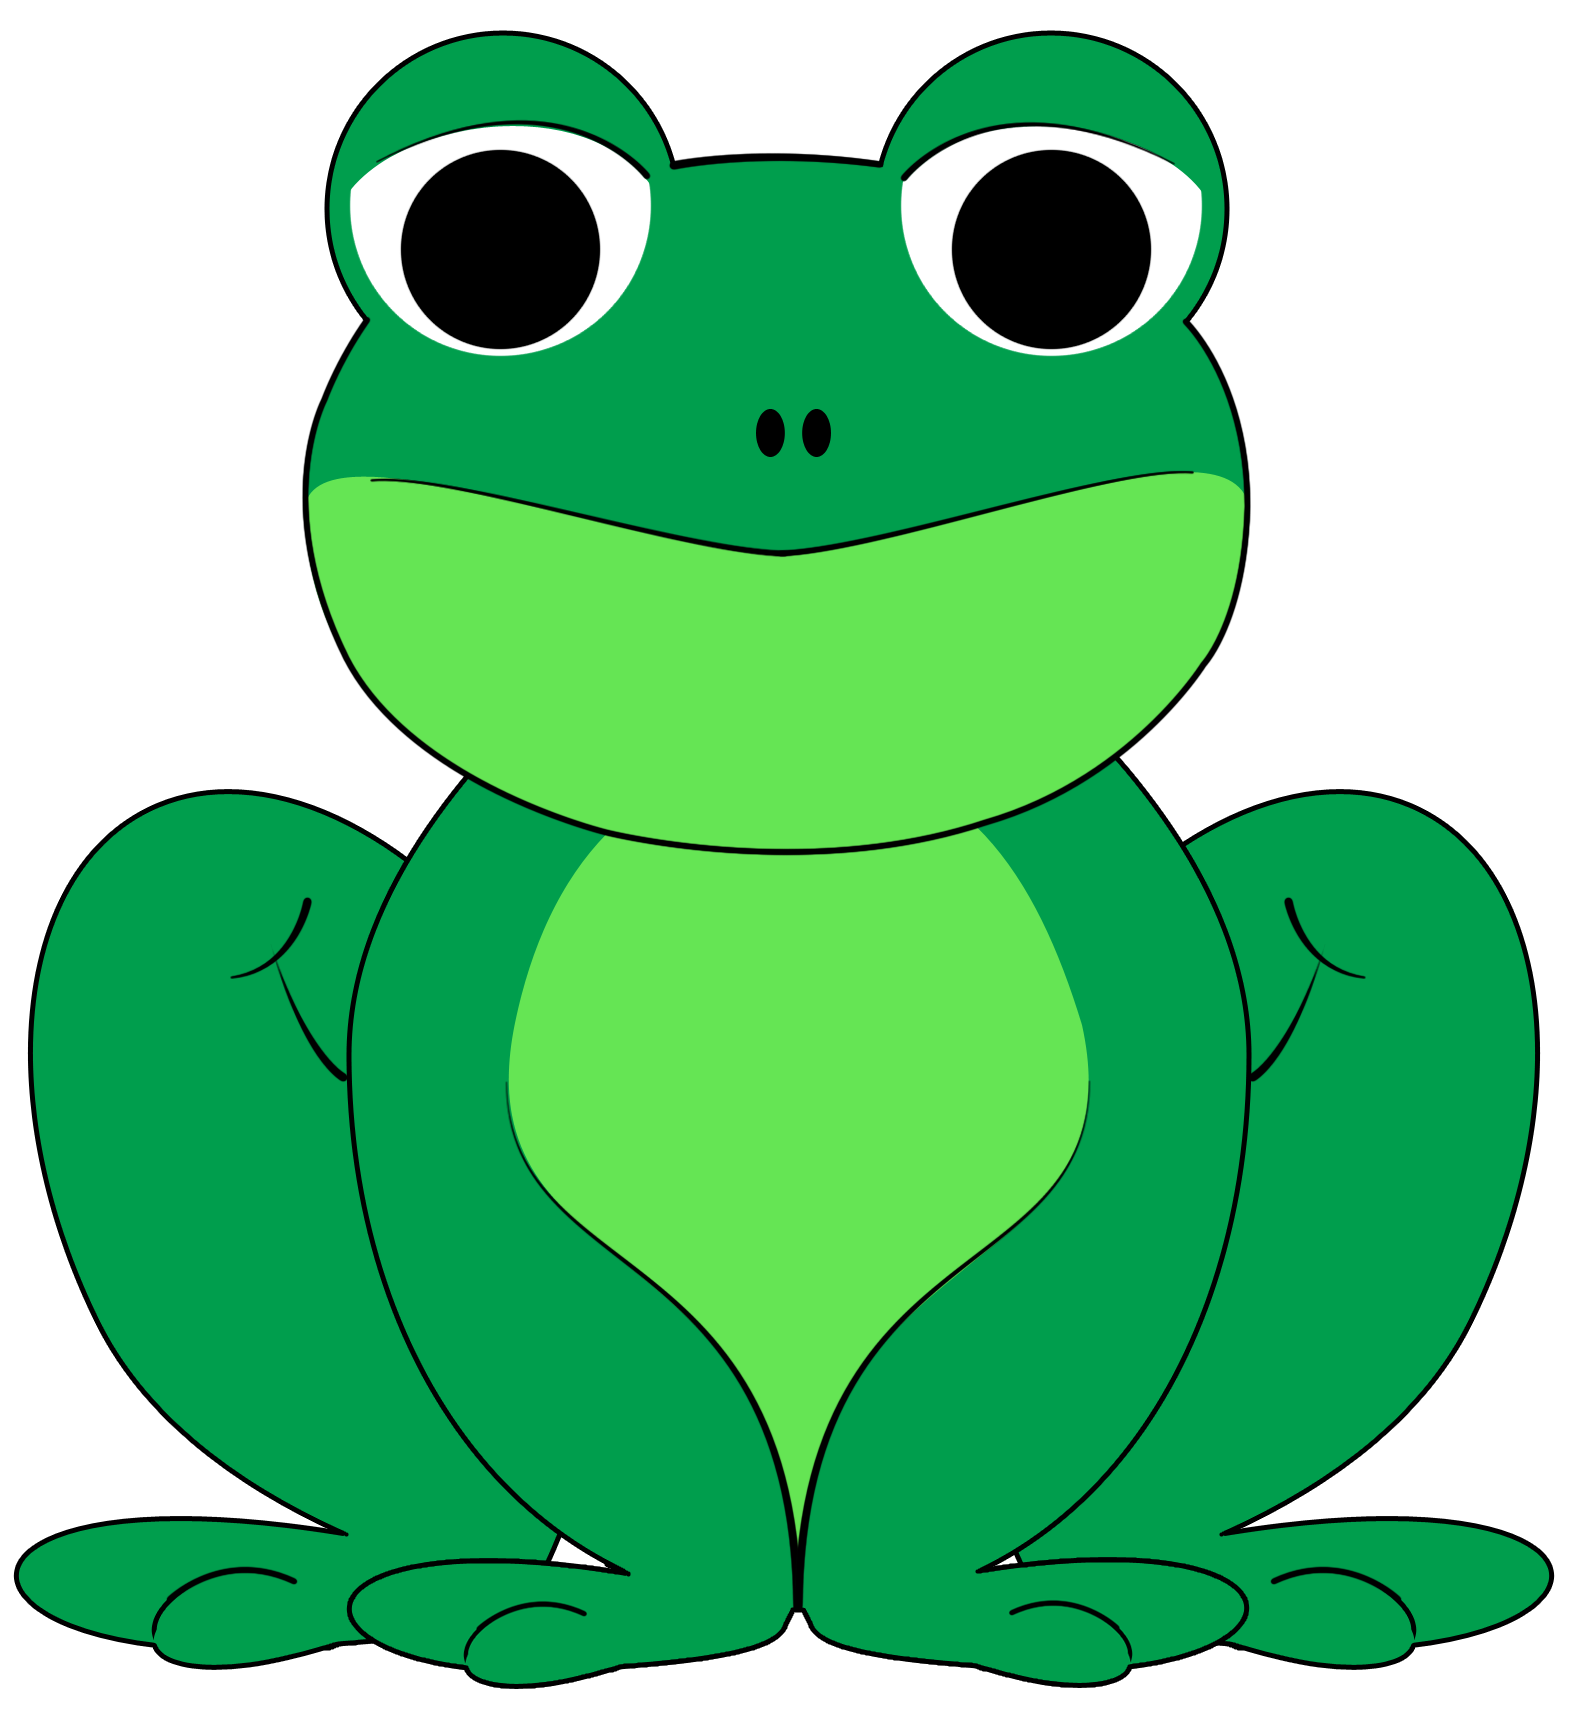 72 Frog Clip Art images . Use these free Frog Clip Art for your ...